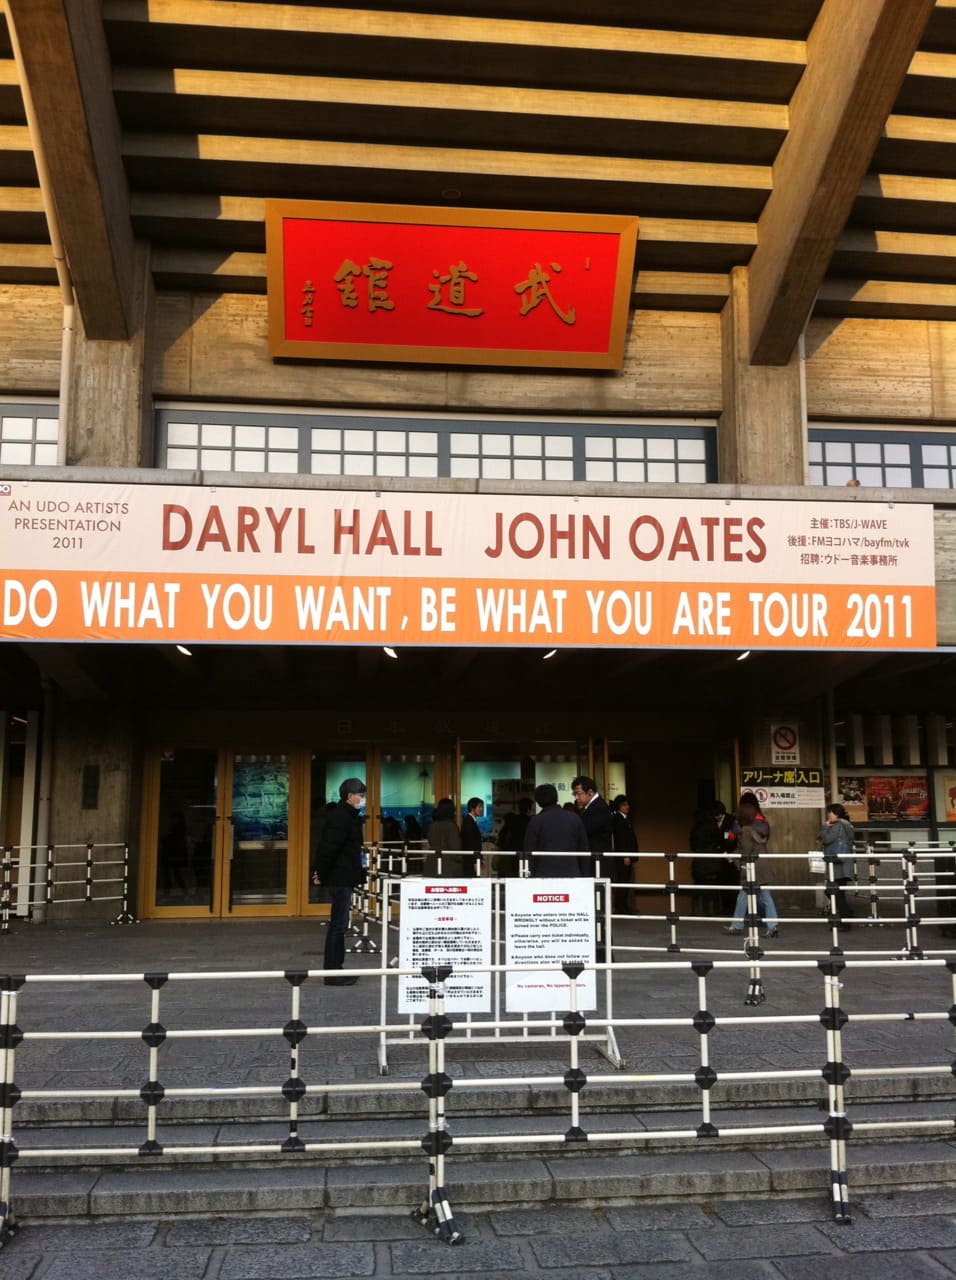 DARYL HALL &  JOHN OATES DO WHAT YOU WANT, BE WHAT YOU ARE TOUR